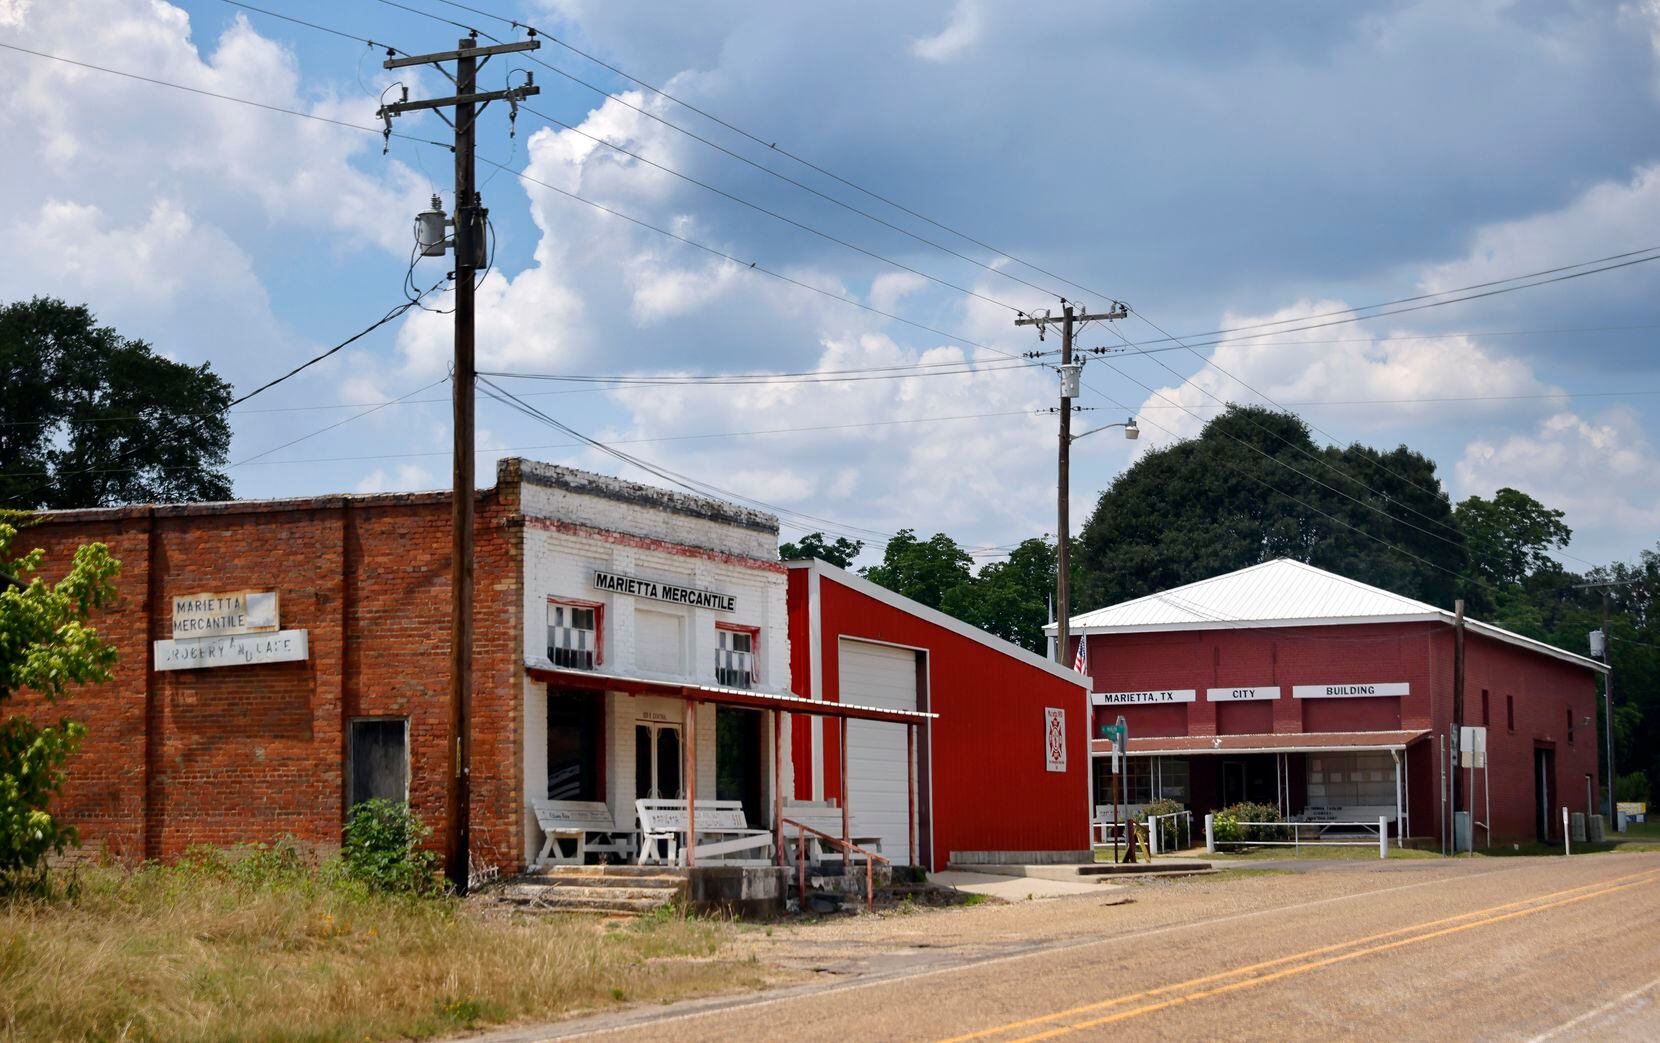 The Marietta city office building (right), volunteer firehouse (center) and old mercantile...